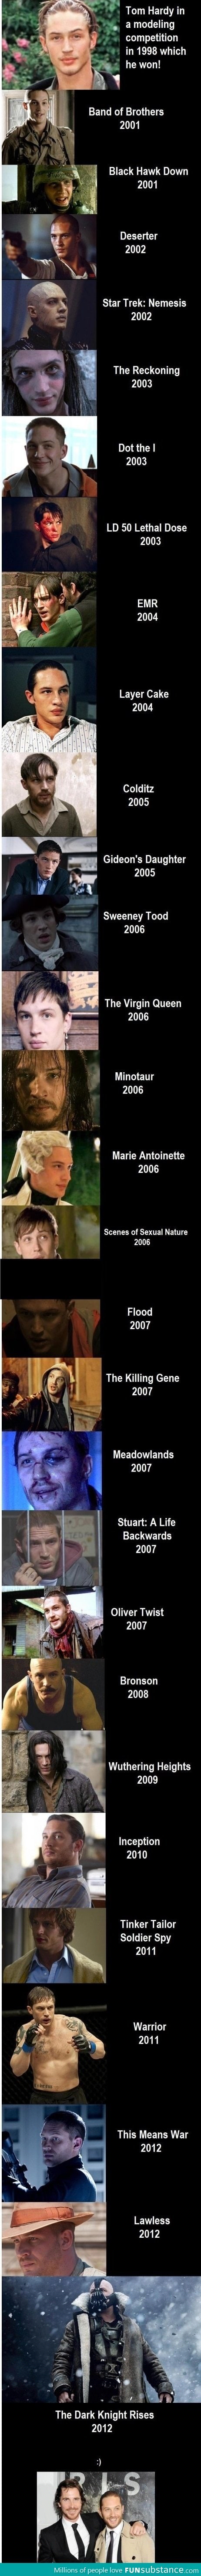 The Evolution of Tom Hardy